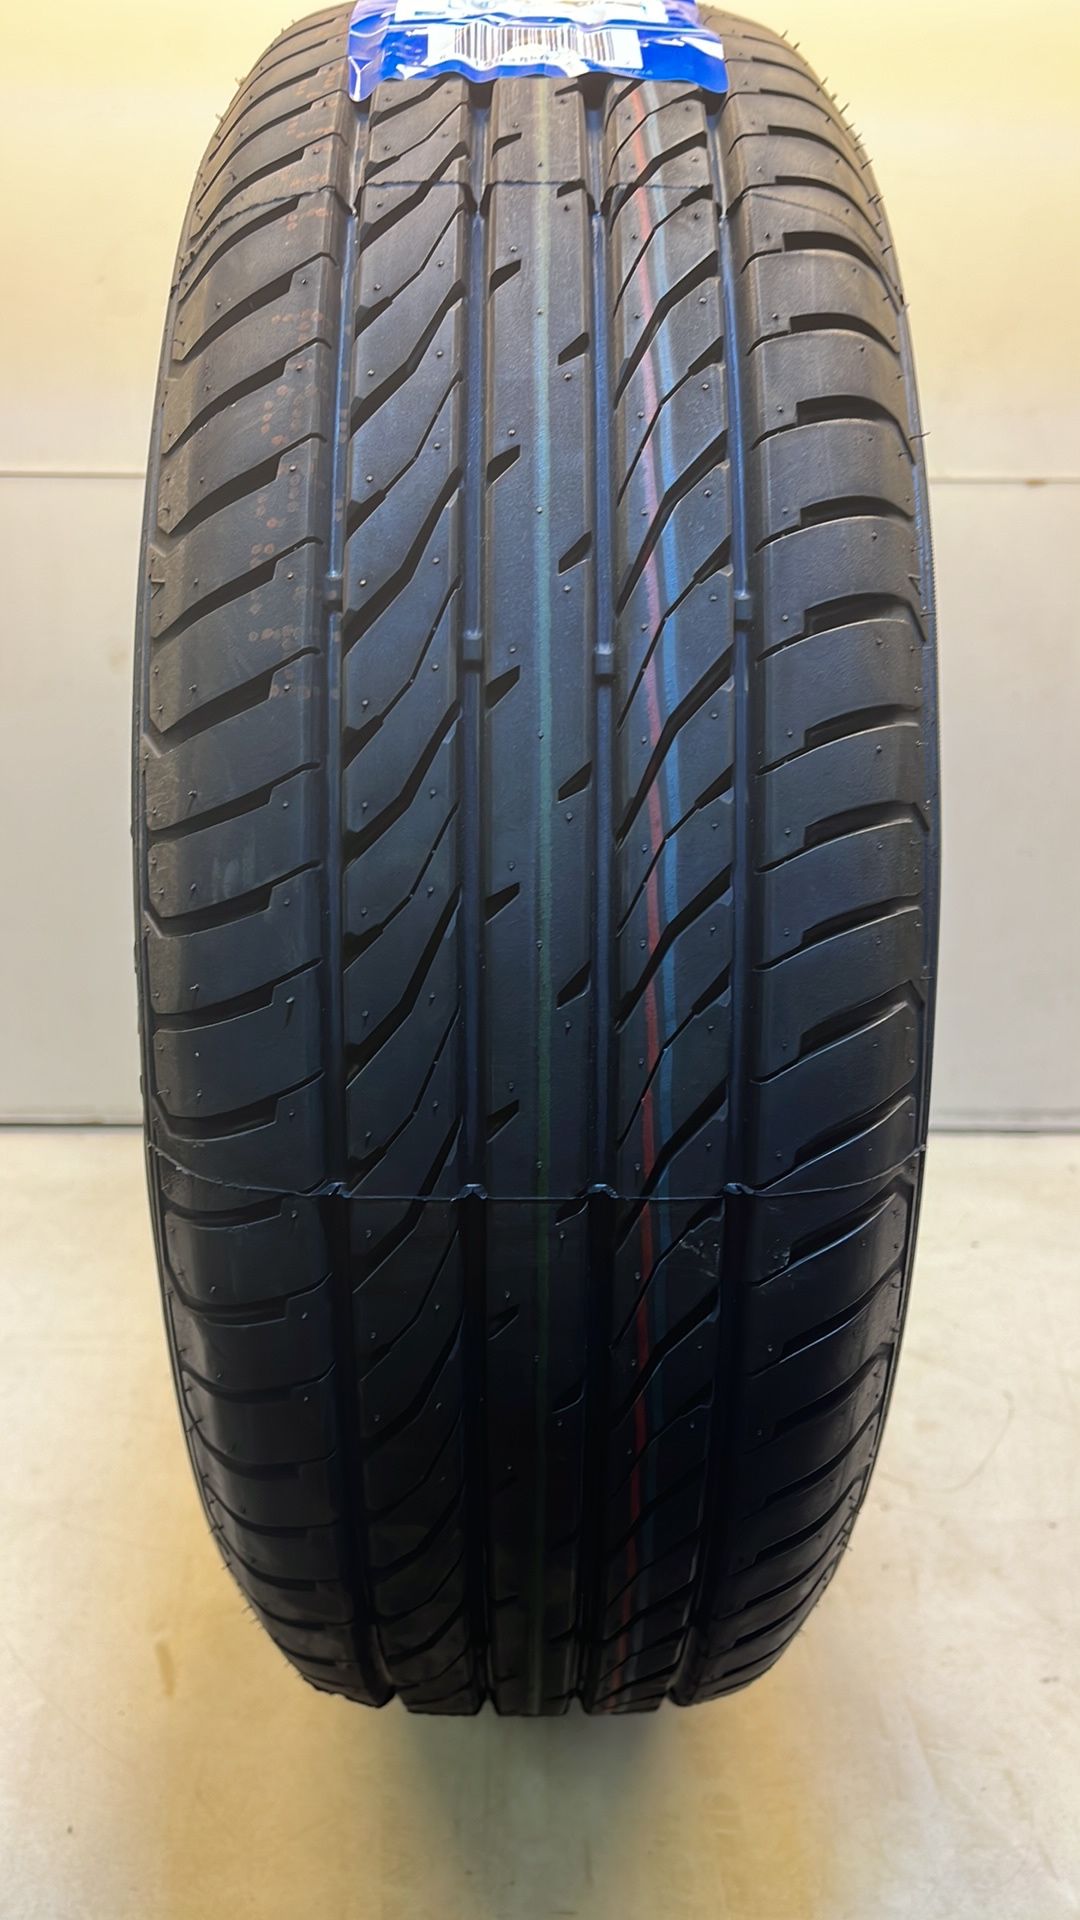 Compasal | Grandeco | 195/60R16 Tyre - Image 2 of 6